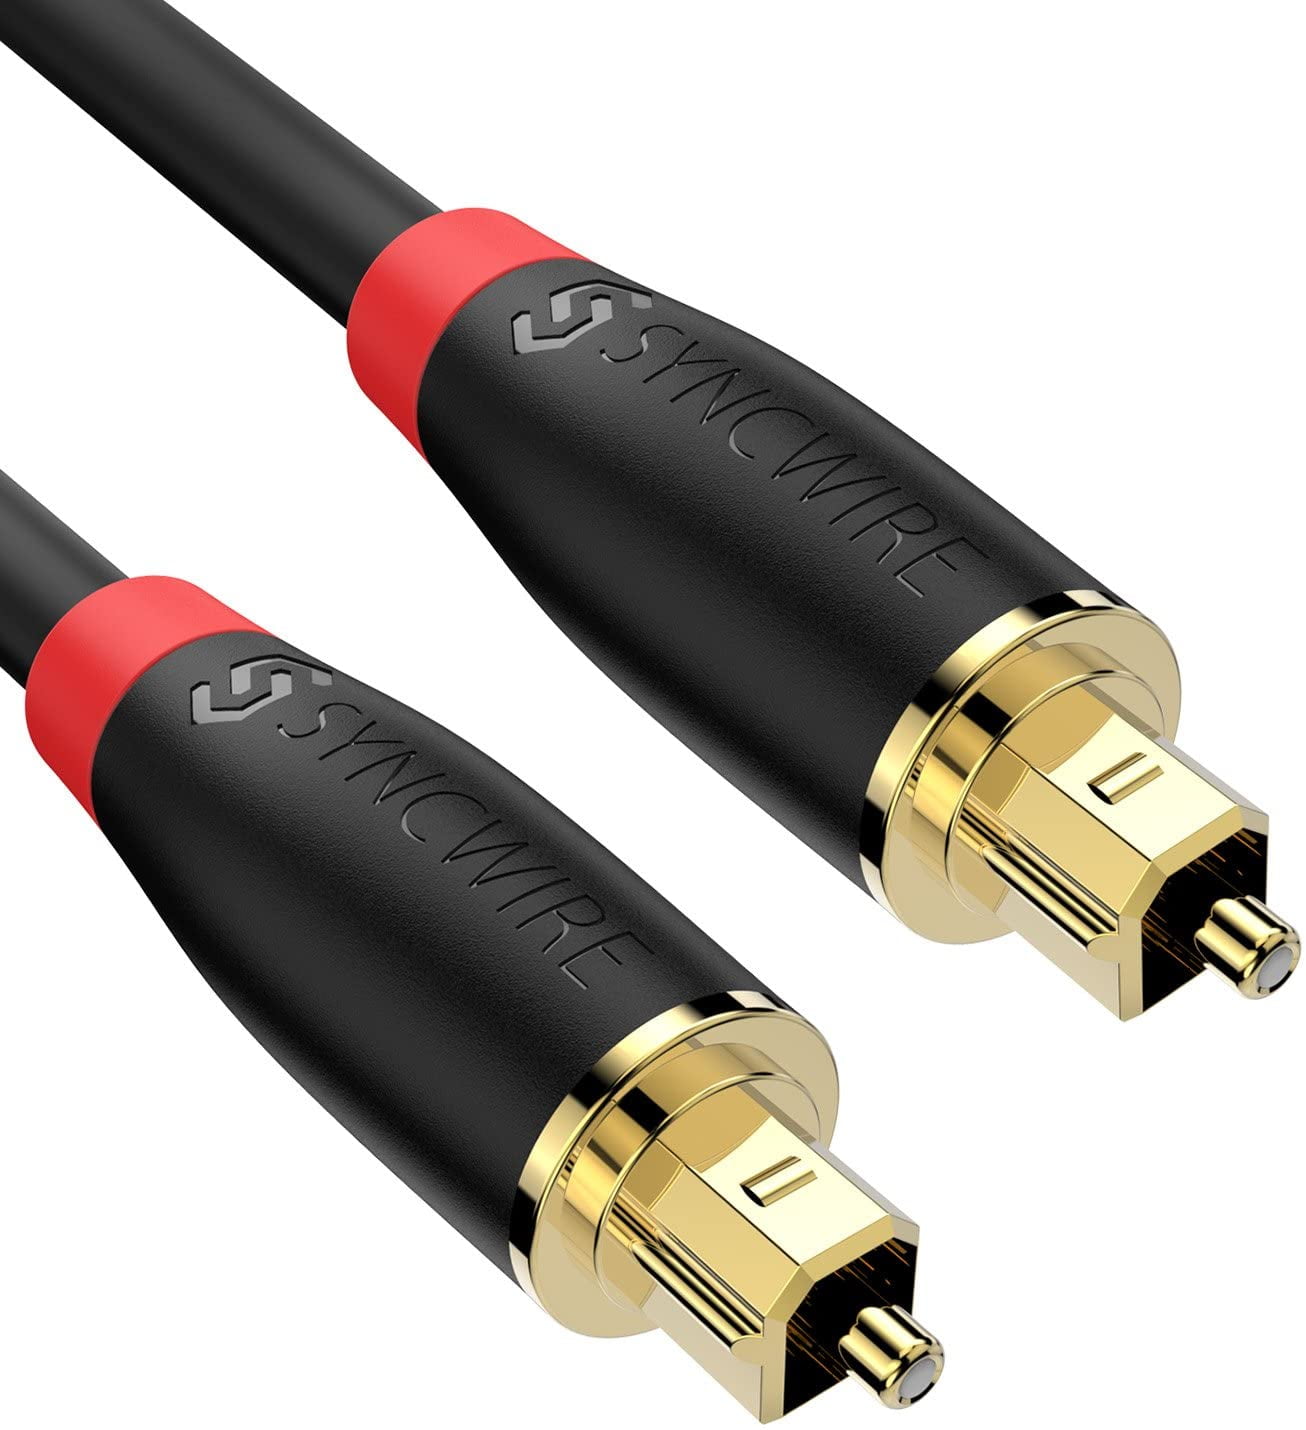 Xbox CableCreation 50FT Digital Fiber Optical TosLink Cable Gold Plated for Home Theater Sound Bar TV PS4 VD/CD Player,Blu-ray Players,Game Console& More,Black 